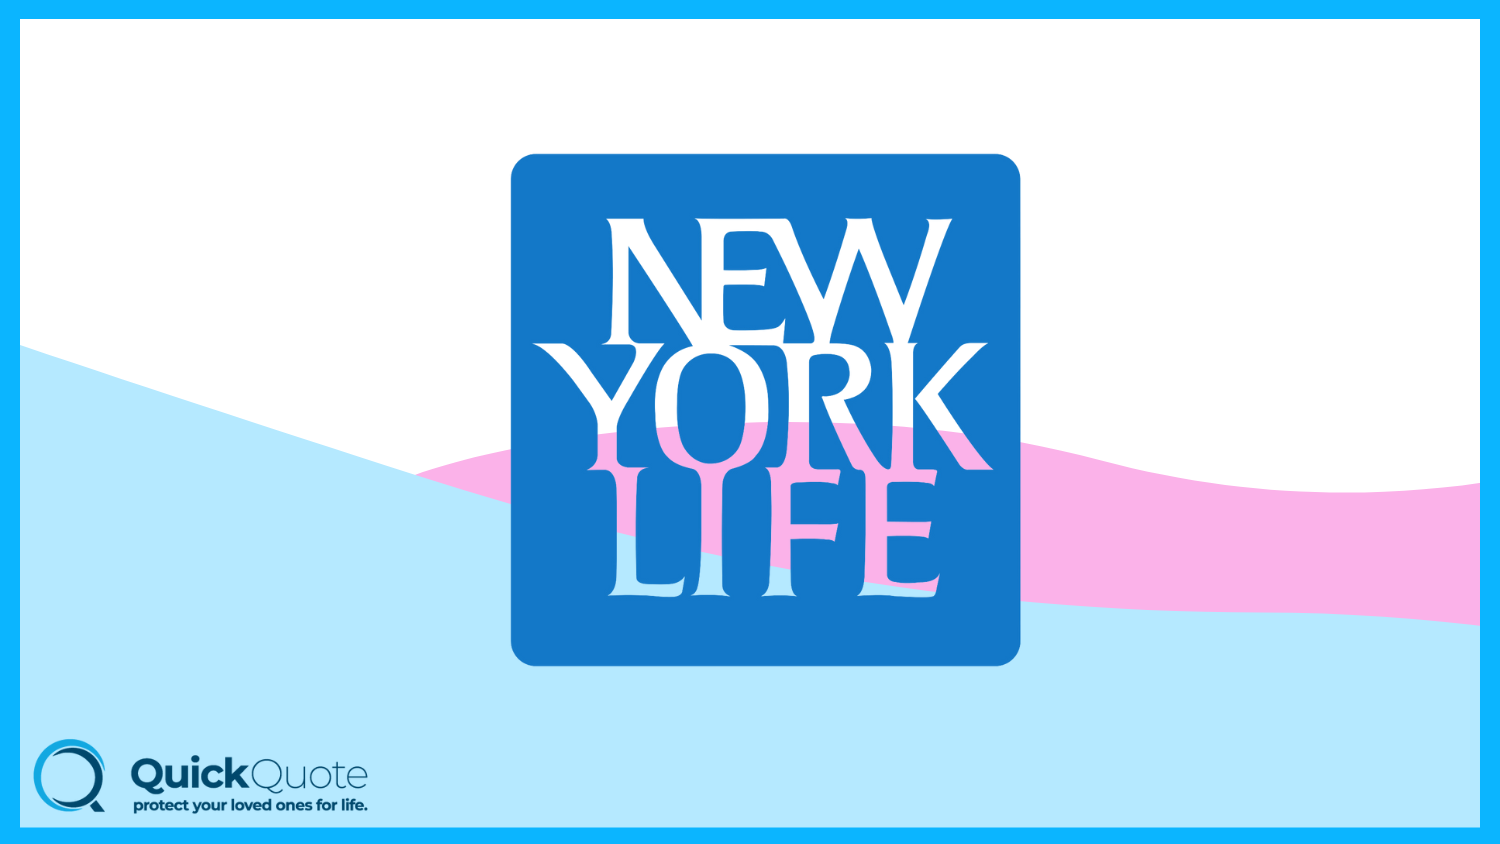 New York Life: Best Life Insurance for People With Disabilities